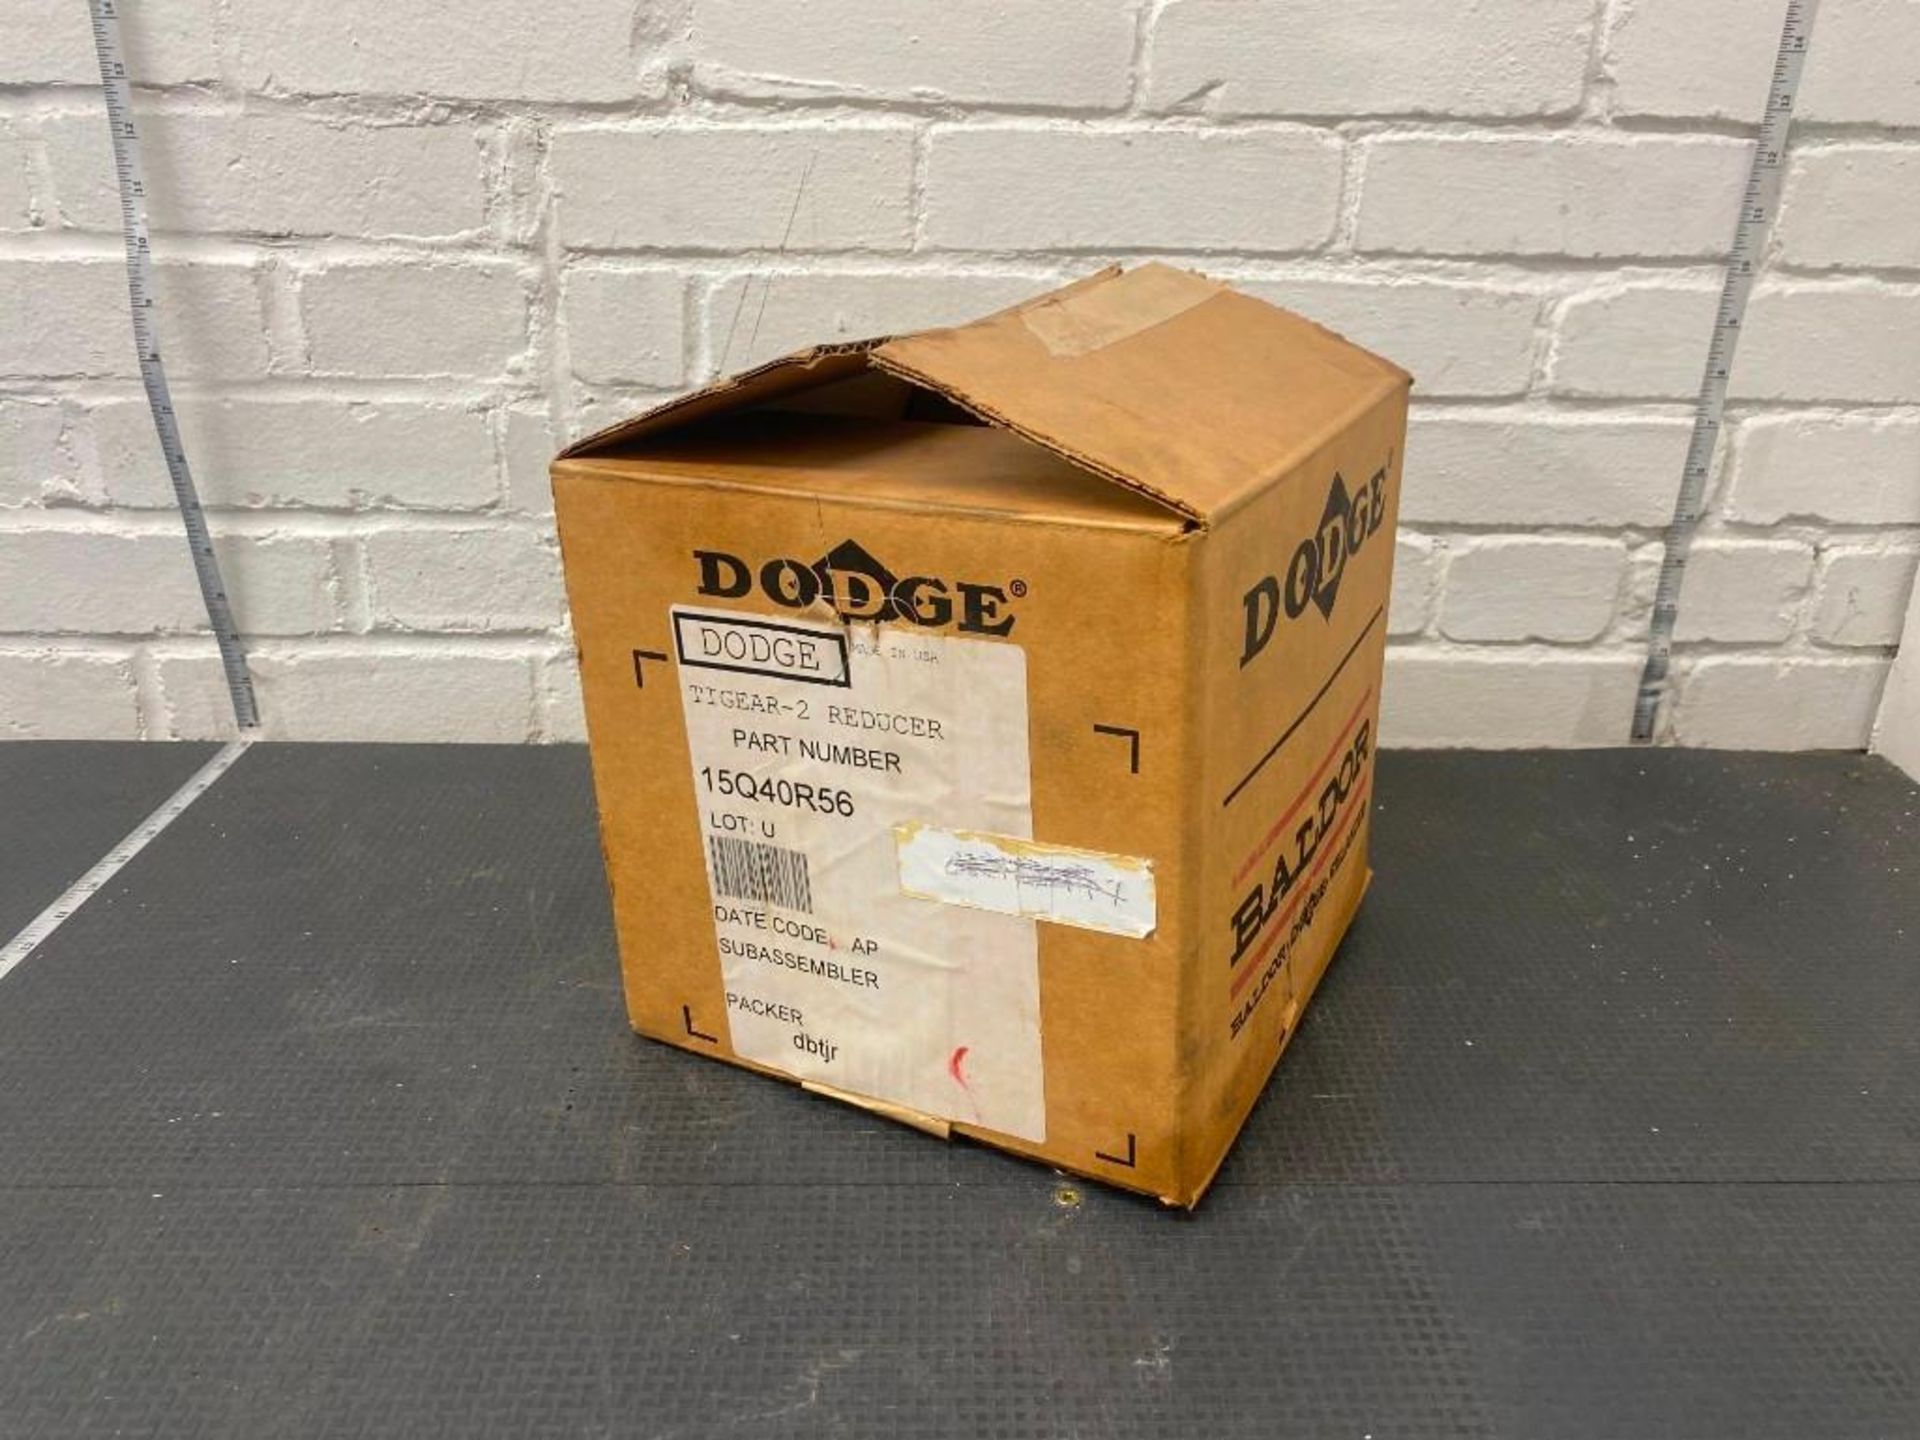 NEW IN BOX DODGE GEARBOX 15Q40R56